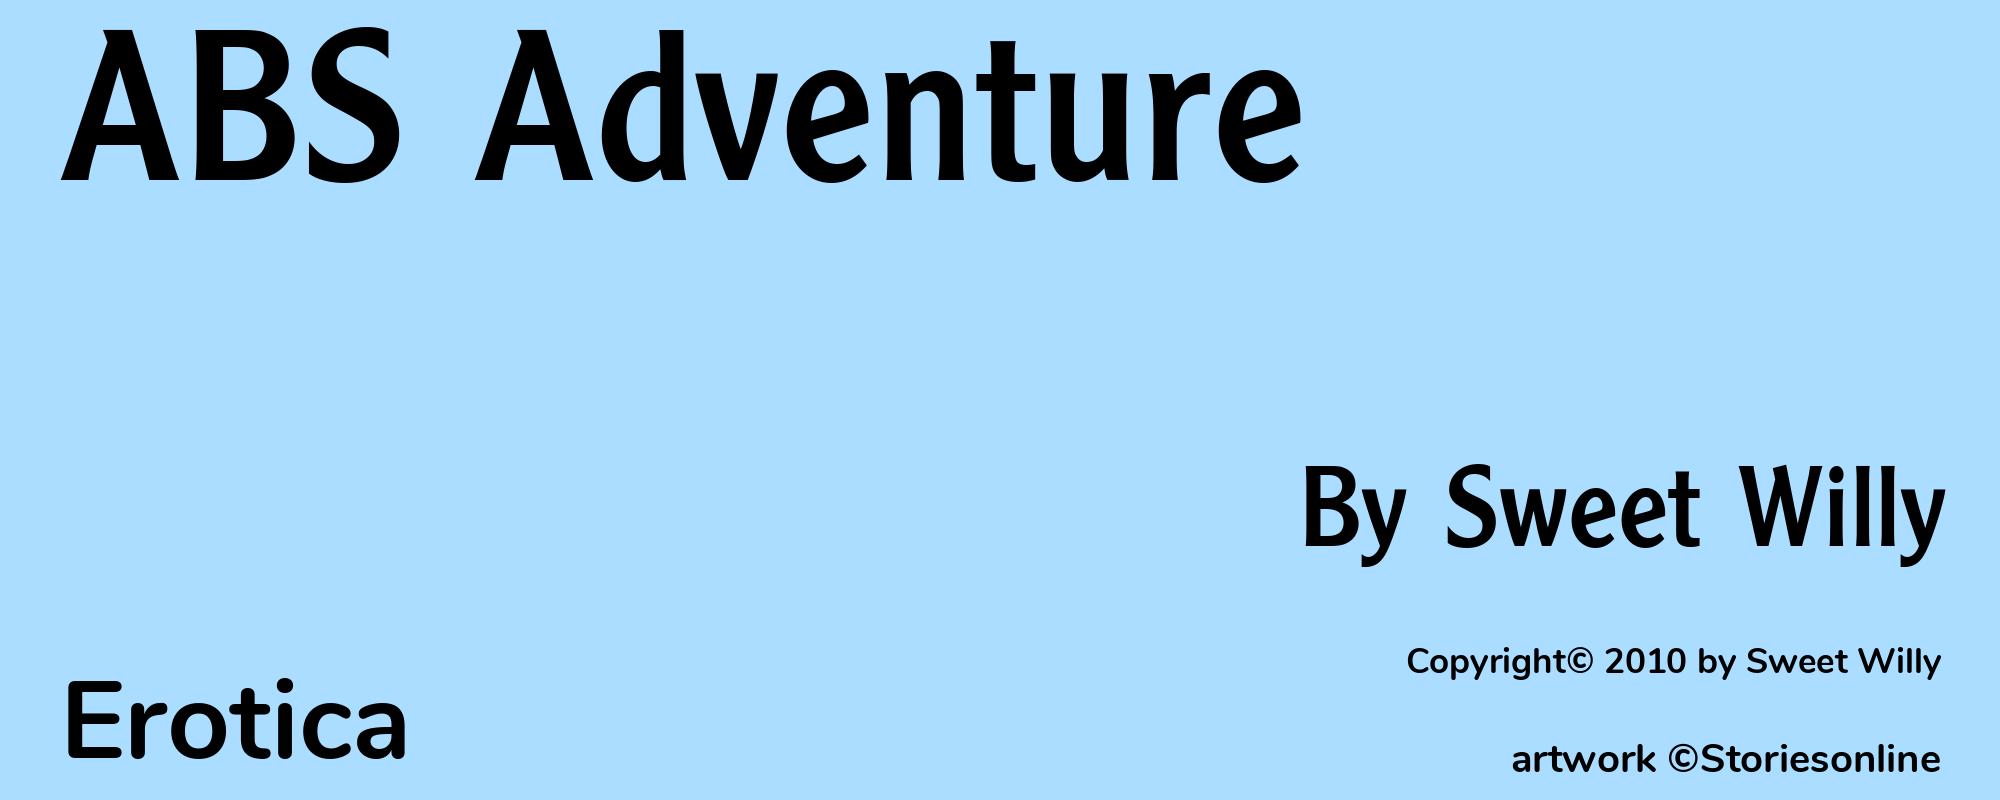 ABS Adventure - Cover